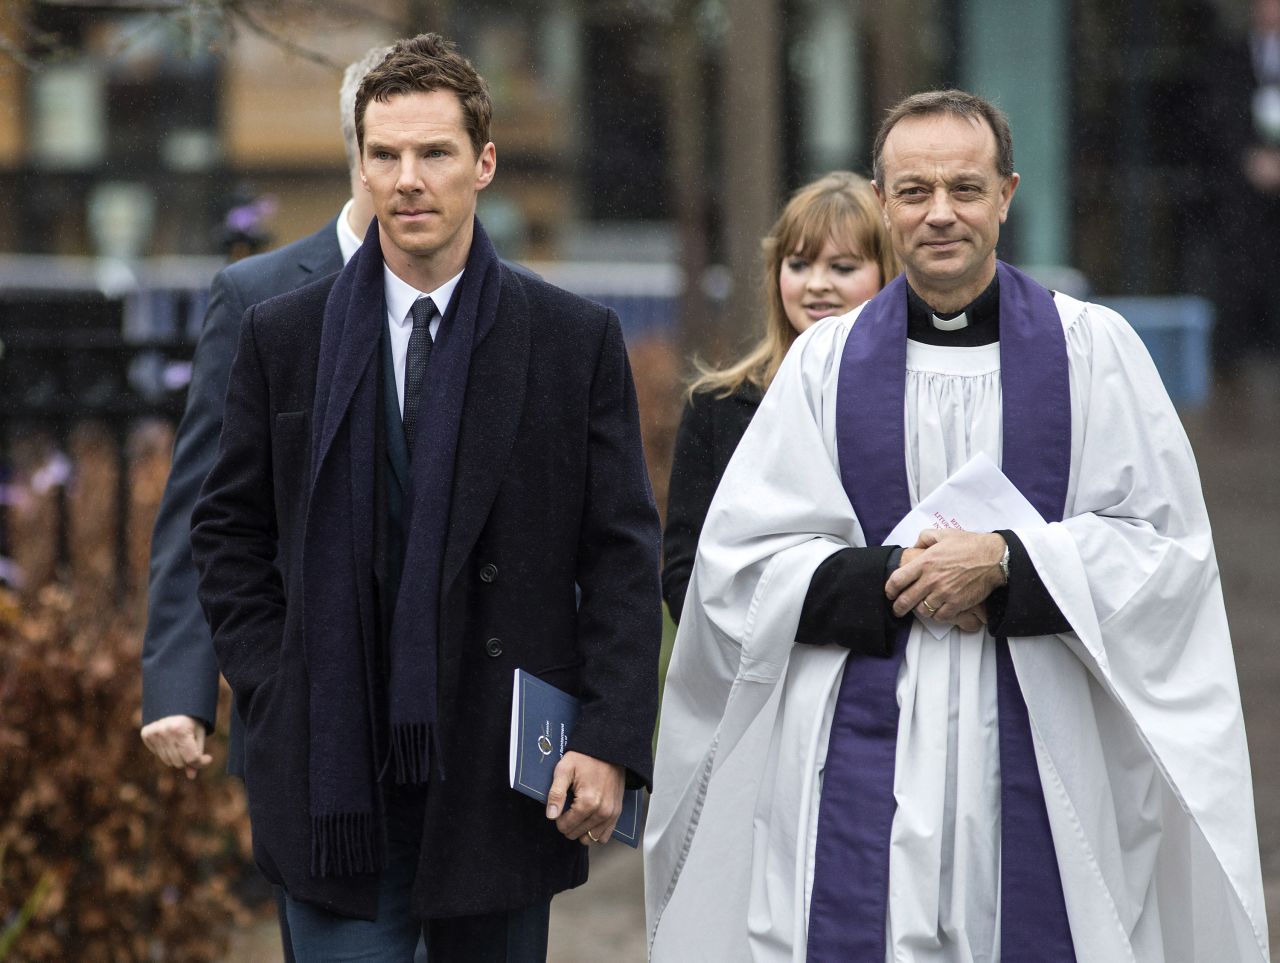 Actor Benedict Cumberbatch arrives at the cathedral. Cumberbatch, a distant cousin of Richard III, read a poem dedicated to the King that was written by Poet Laureate Carol Ann Duffy.